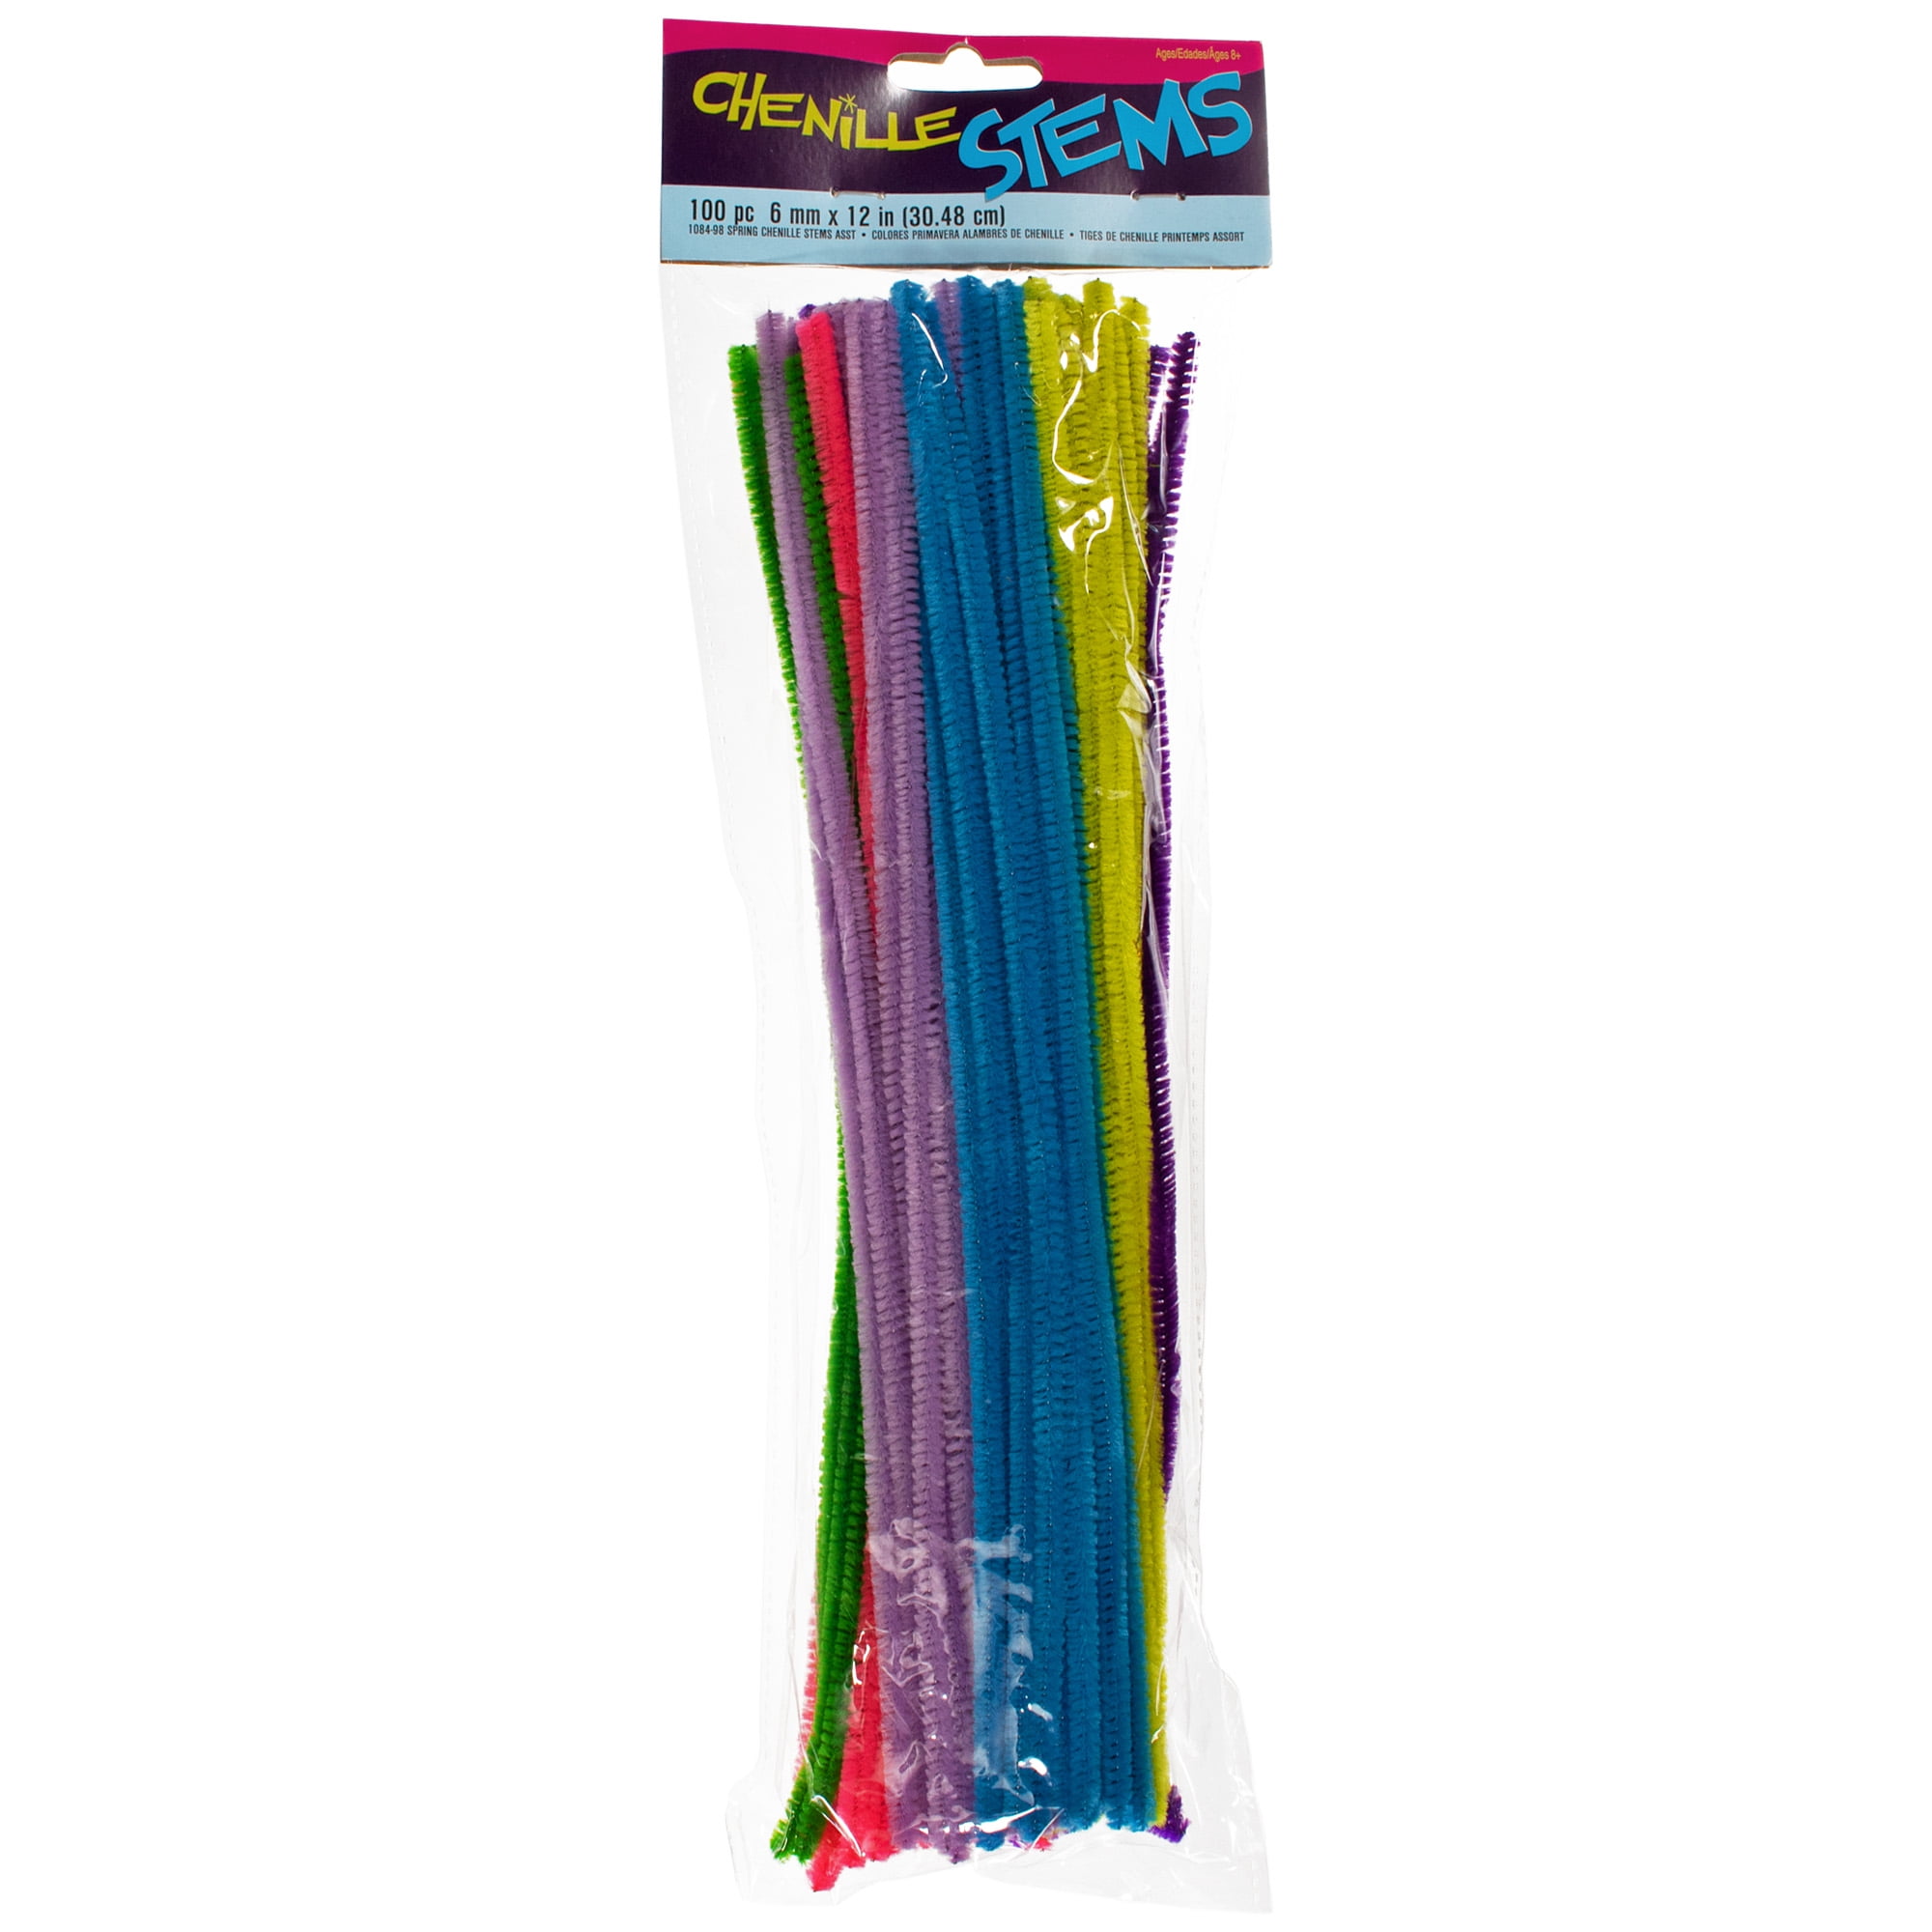 Classrooms 100pc Grey DIY Craft Projects Pipe Cleaners Easy to Bend to Create Shapes CalCastle Craft Chenille Tinsel Stems Objects Great for Kids Home and More 6mm x 12” Long 